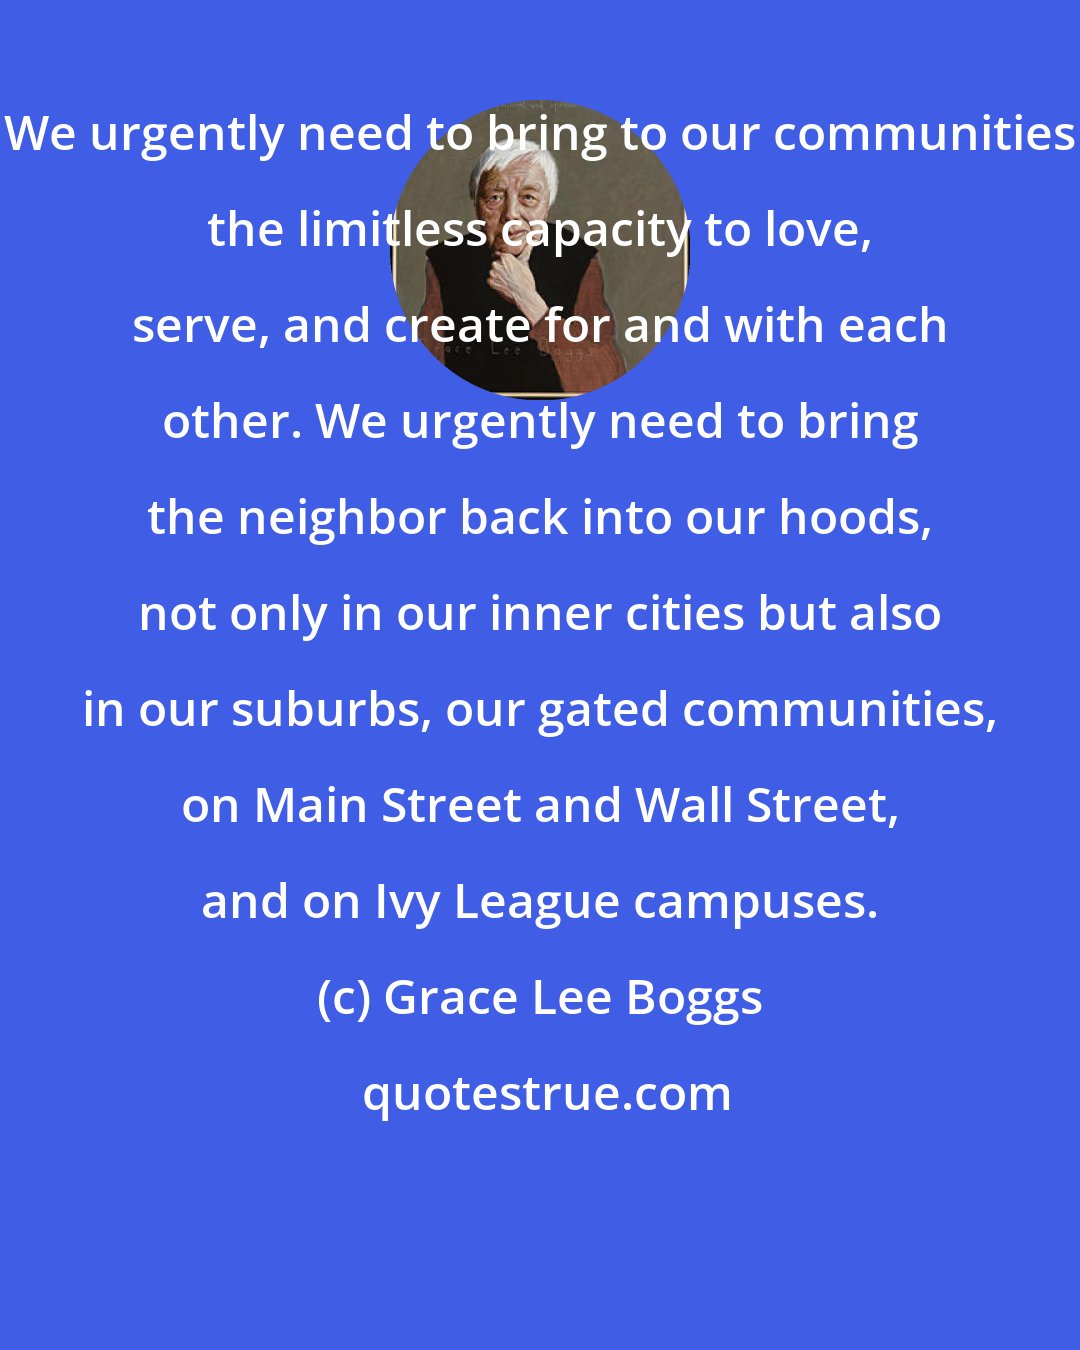 Grace Lee Boggs: We urgently need to bring to our communities the limitless capacity to love, serve, and create for and with each other. We urgently need to bring the neighbor back into our hoods, not only in our inner cities but also in our suburbs, our gated communities, on Main Street and Wall Street, and on Ivy League campuses.